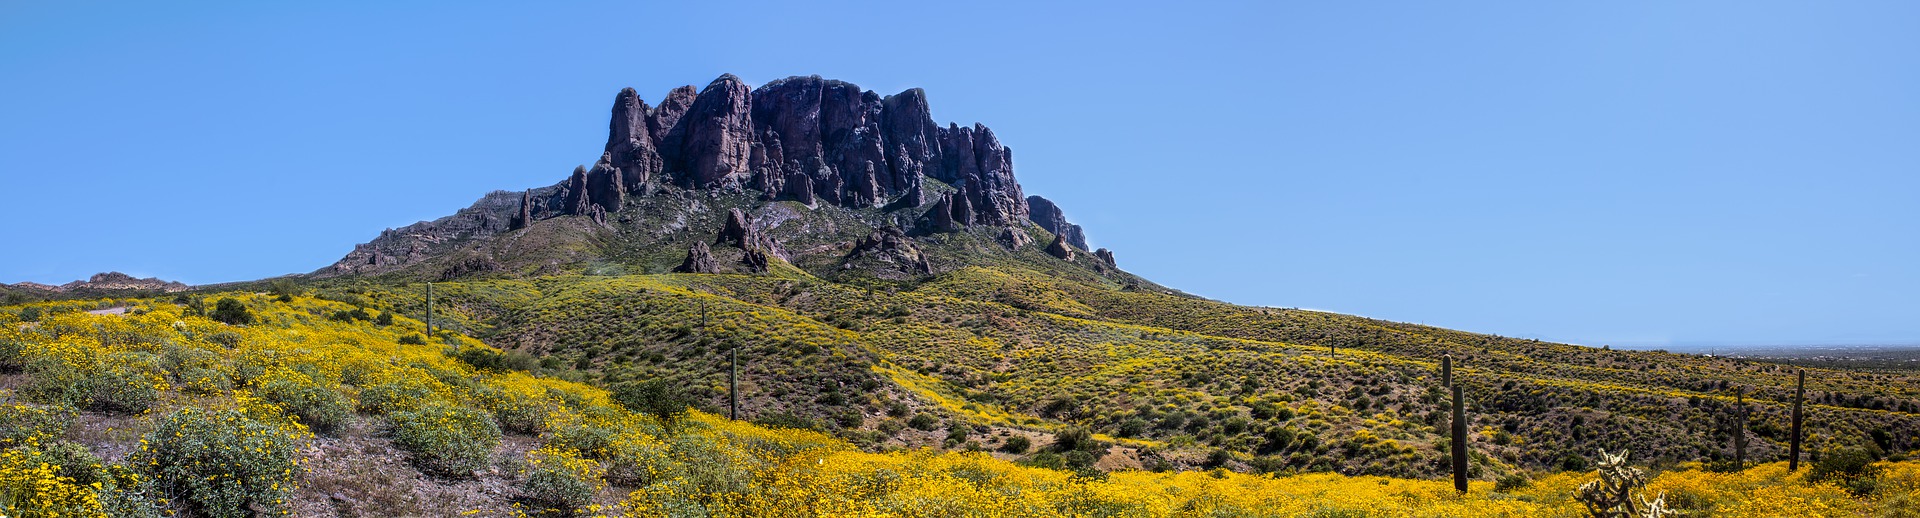 Superstition Mountains hiking is one of the many fun things to do in Phoenix.